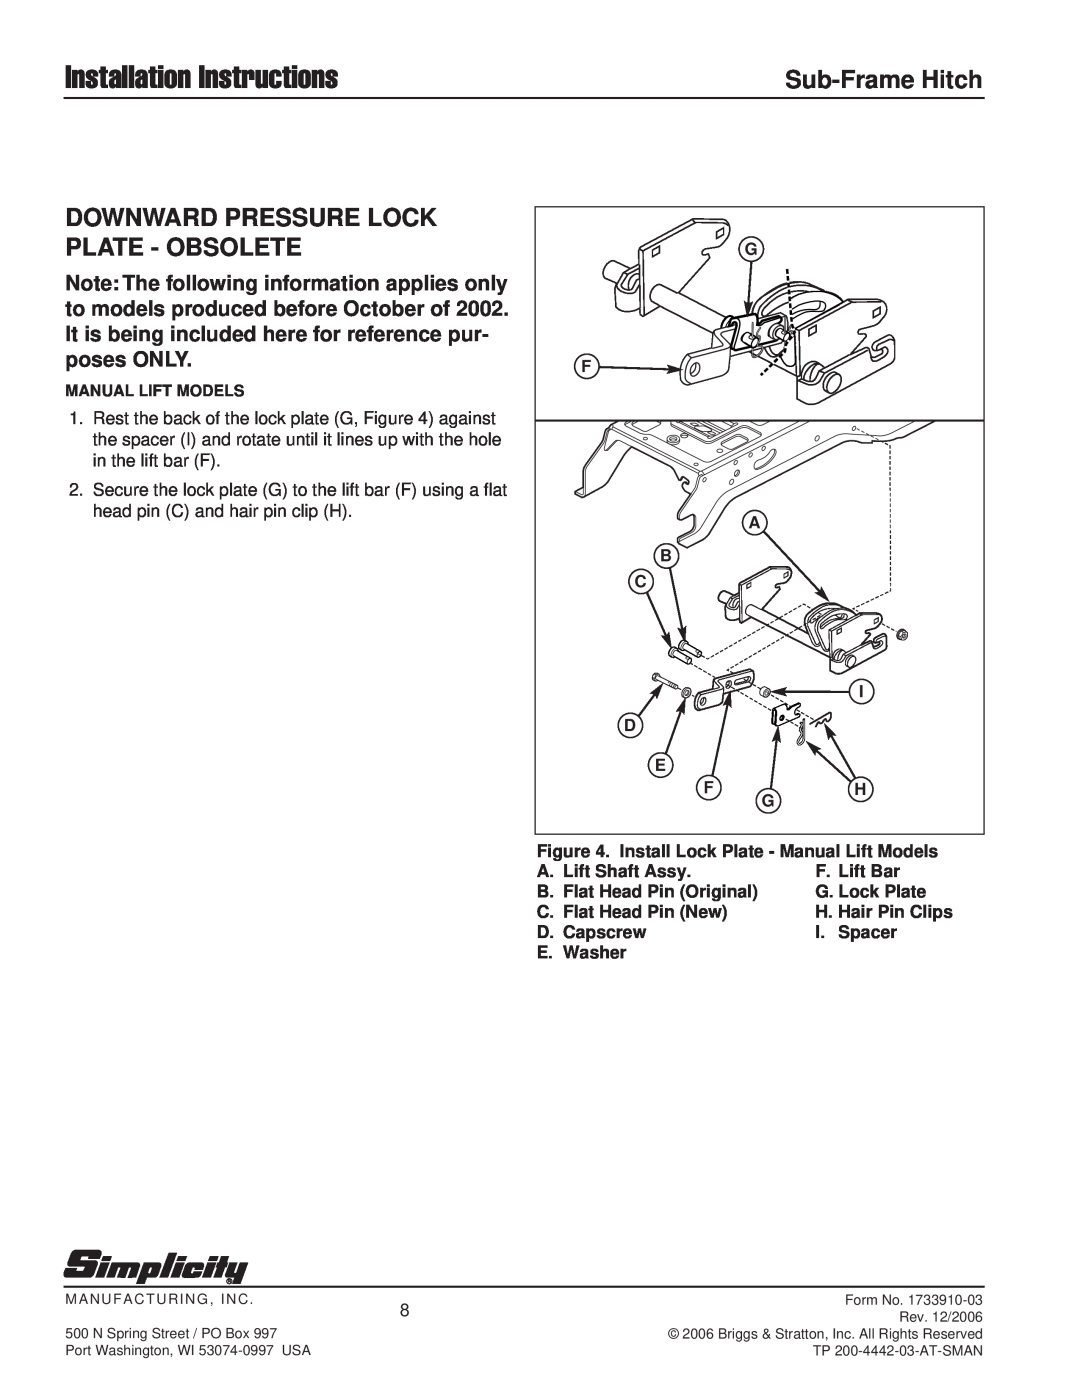 Snapper 1695195 Downward Pressure Lock Plate - Obsolete, Installation Instructions, Sub-Frame Hitch, Manufacturing, Inc 